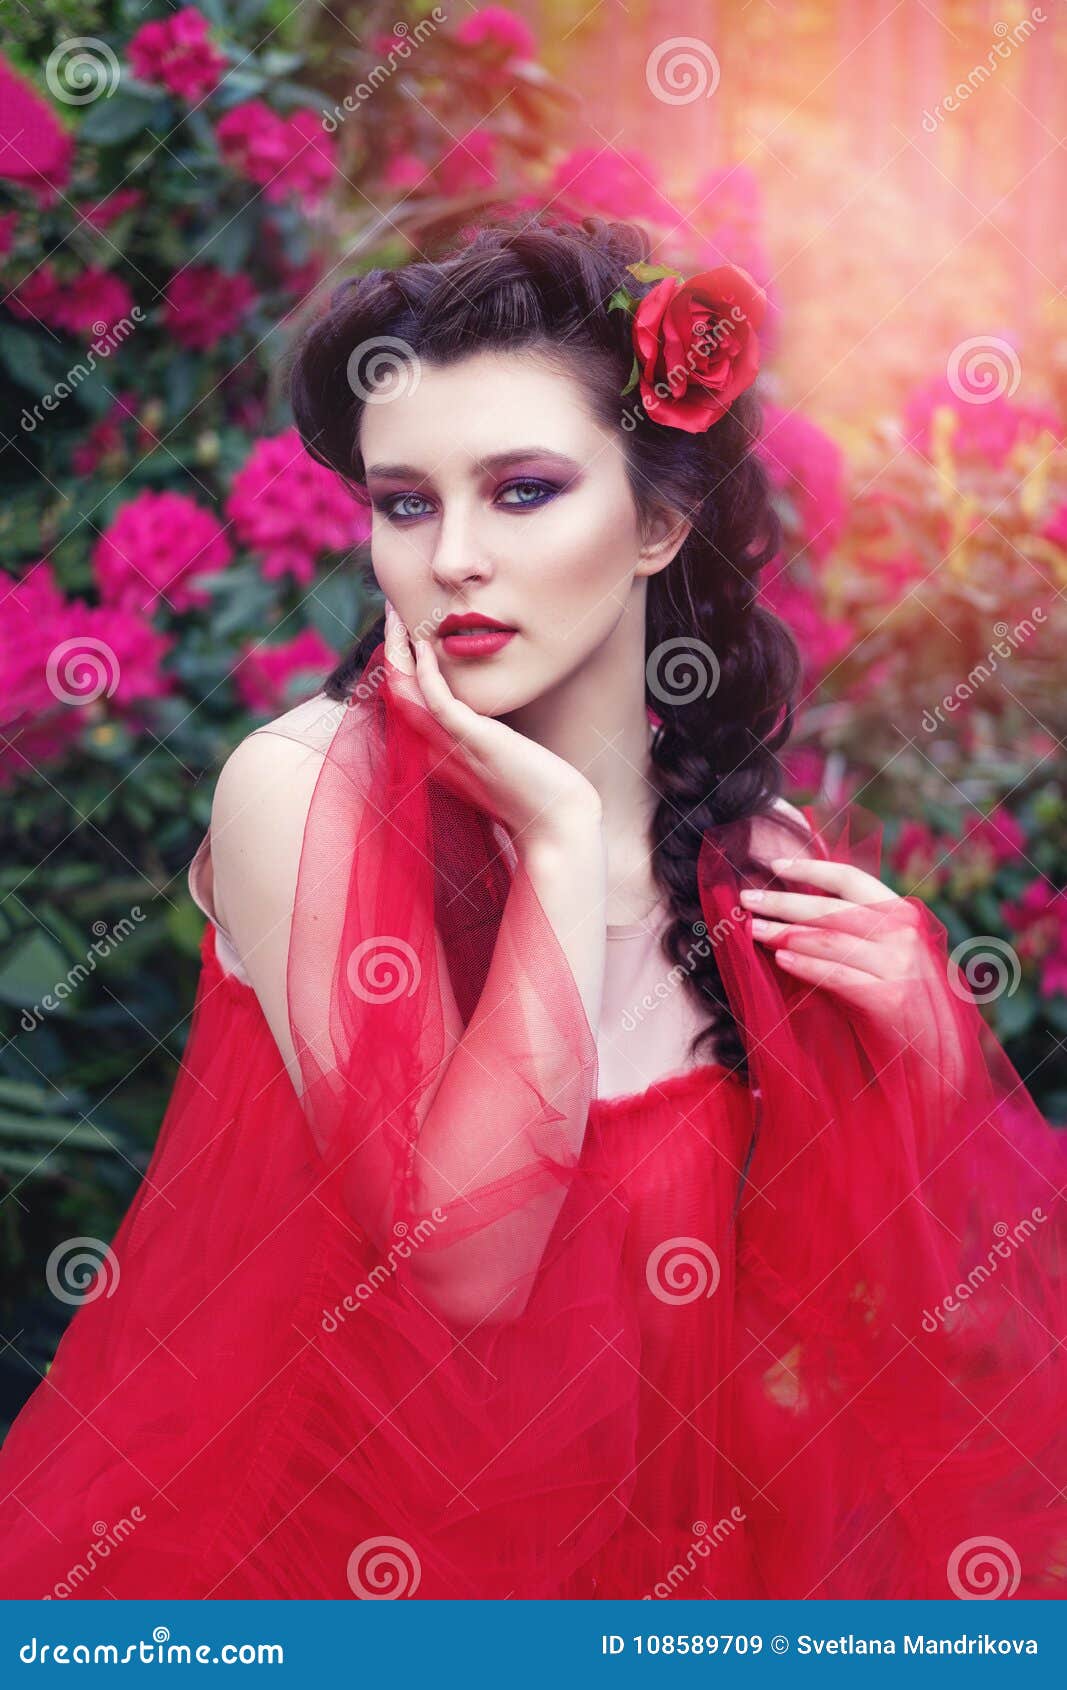 Girl in Dress in Rhododendron Garden Stock Image - Image of beauty ...